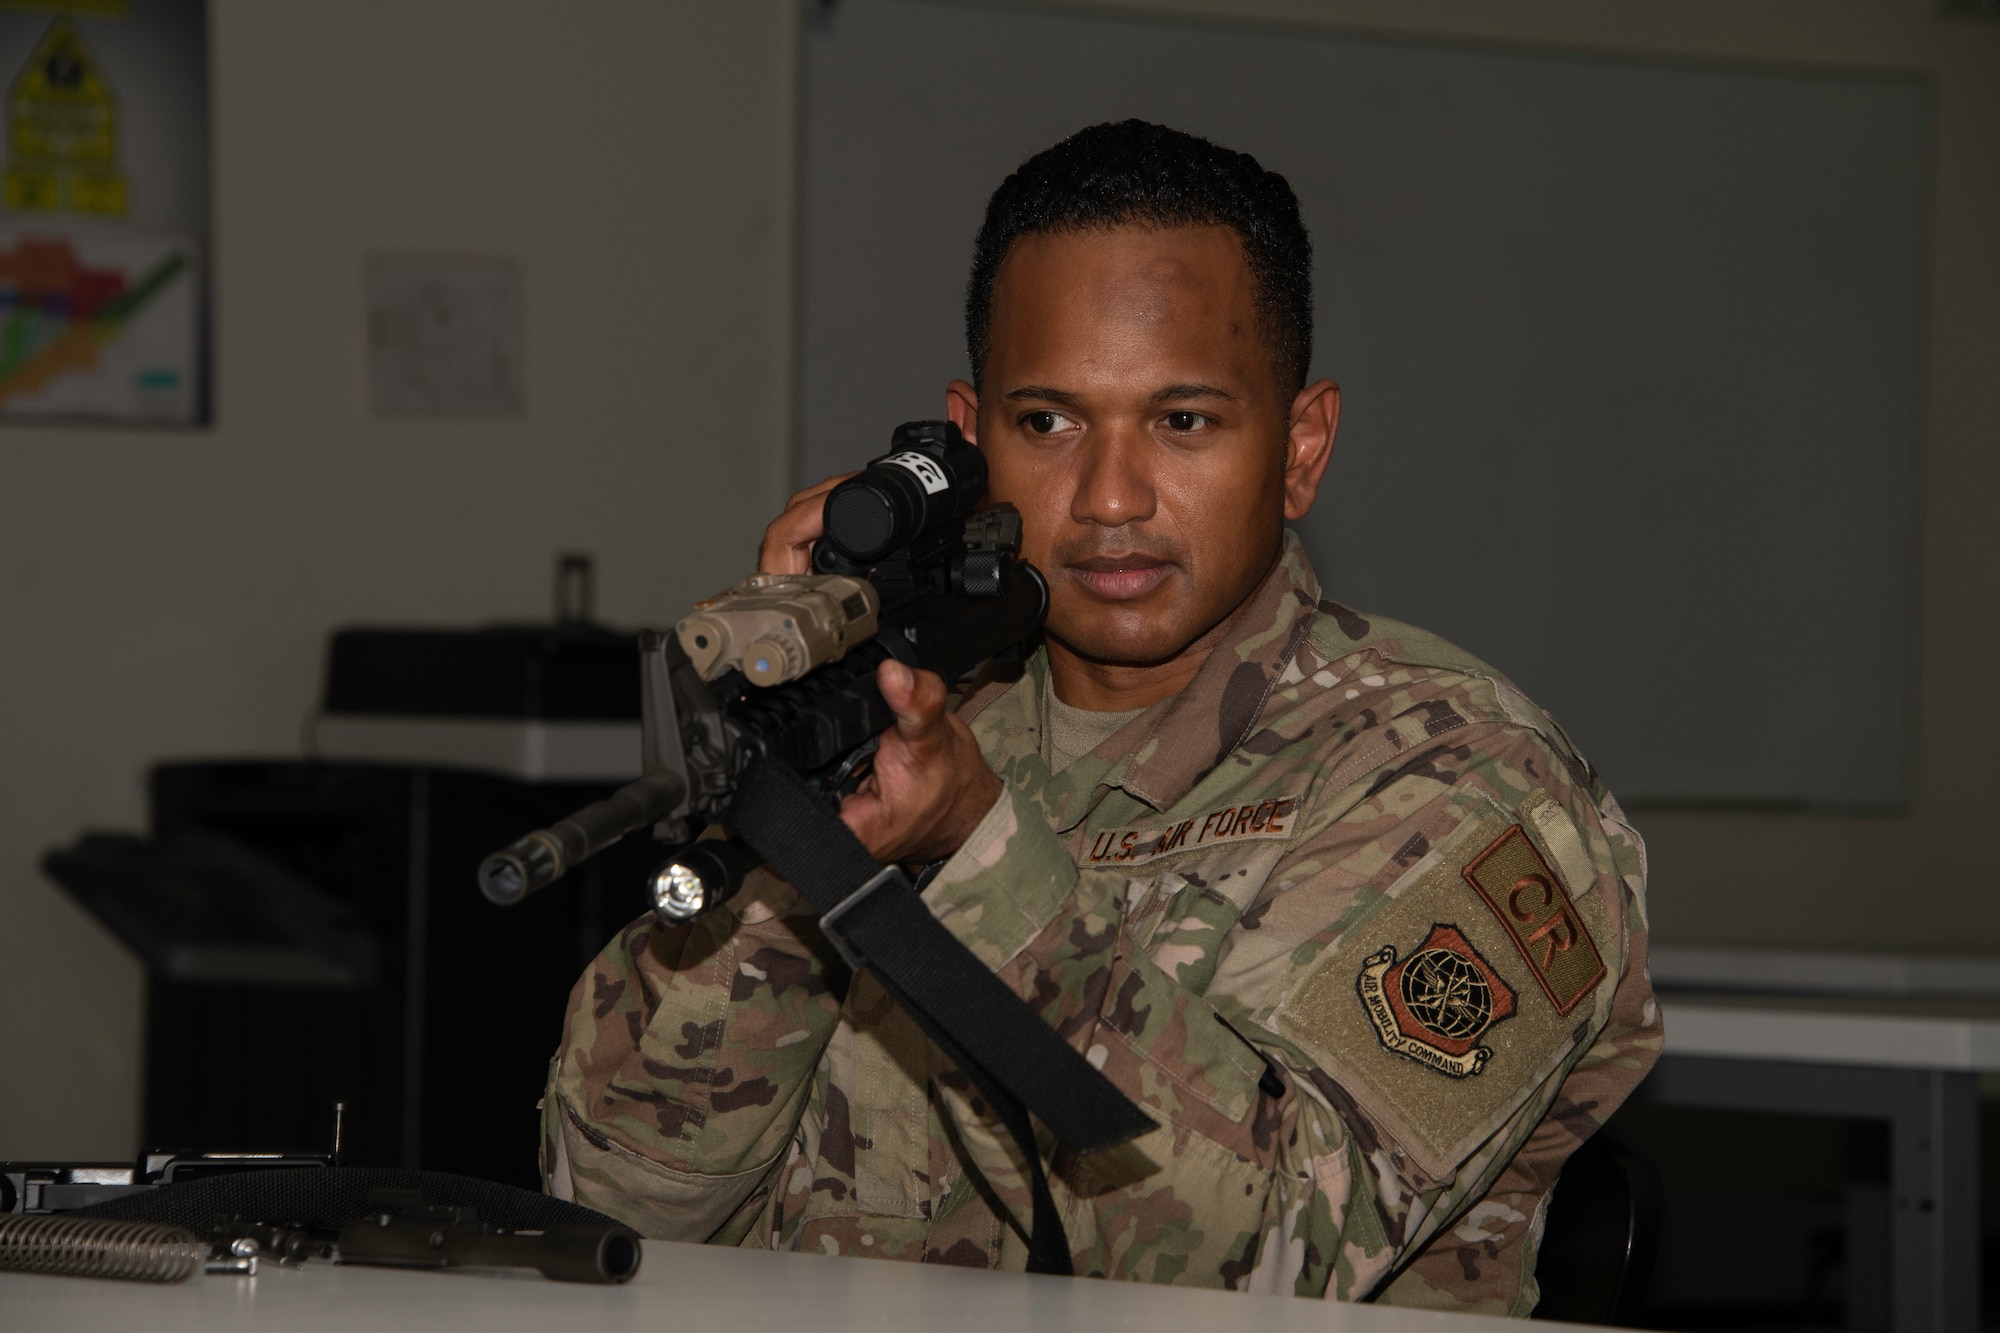 U.S. Air Force Master Sgt. Frank Monsegue, 921st Contingency Response Squadron maintenance flight chief, inspects an M-4 carbine rifle during a weapons training class at Travis Air Force Base, California, May 27, 2020. The 60th Security Forces Squadron combat arms training and maintenance section trains more than 3,000 Airmen each year on 10 weapon systems. (U.S. Air Force photo by Tech. Sgt. James Hodgman)